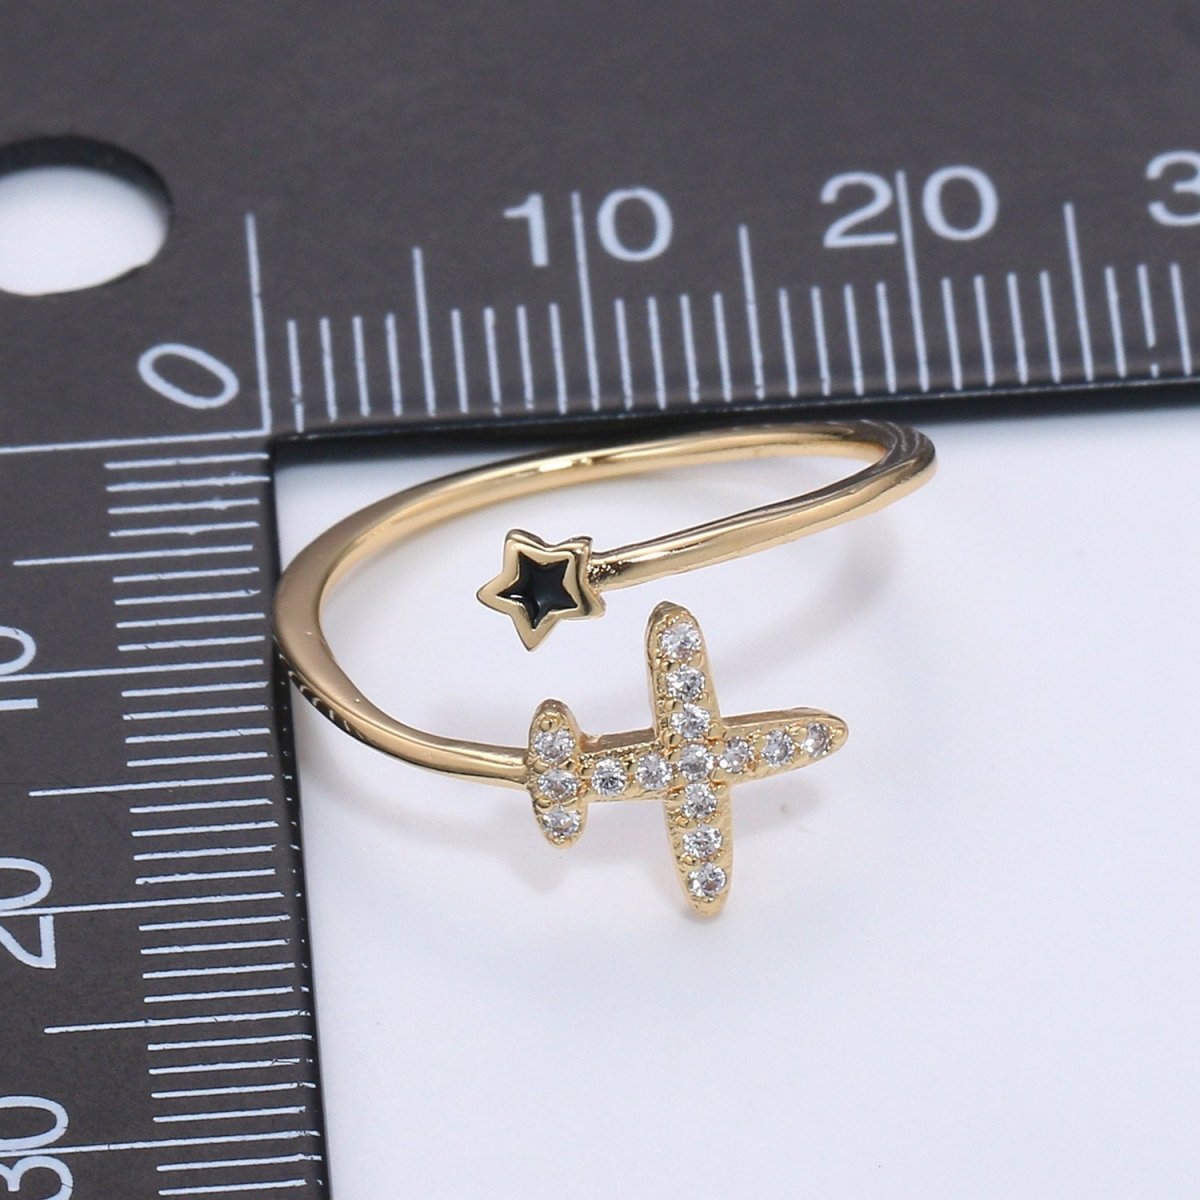 Dainty Airplane Ring, Plane Ring, Thin Open Ring Gift for Stewardess, Stackable Gold Ring, Travel Ring, Aviation Jewelry Adjustable Ring R-067 - DLUXCA